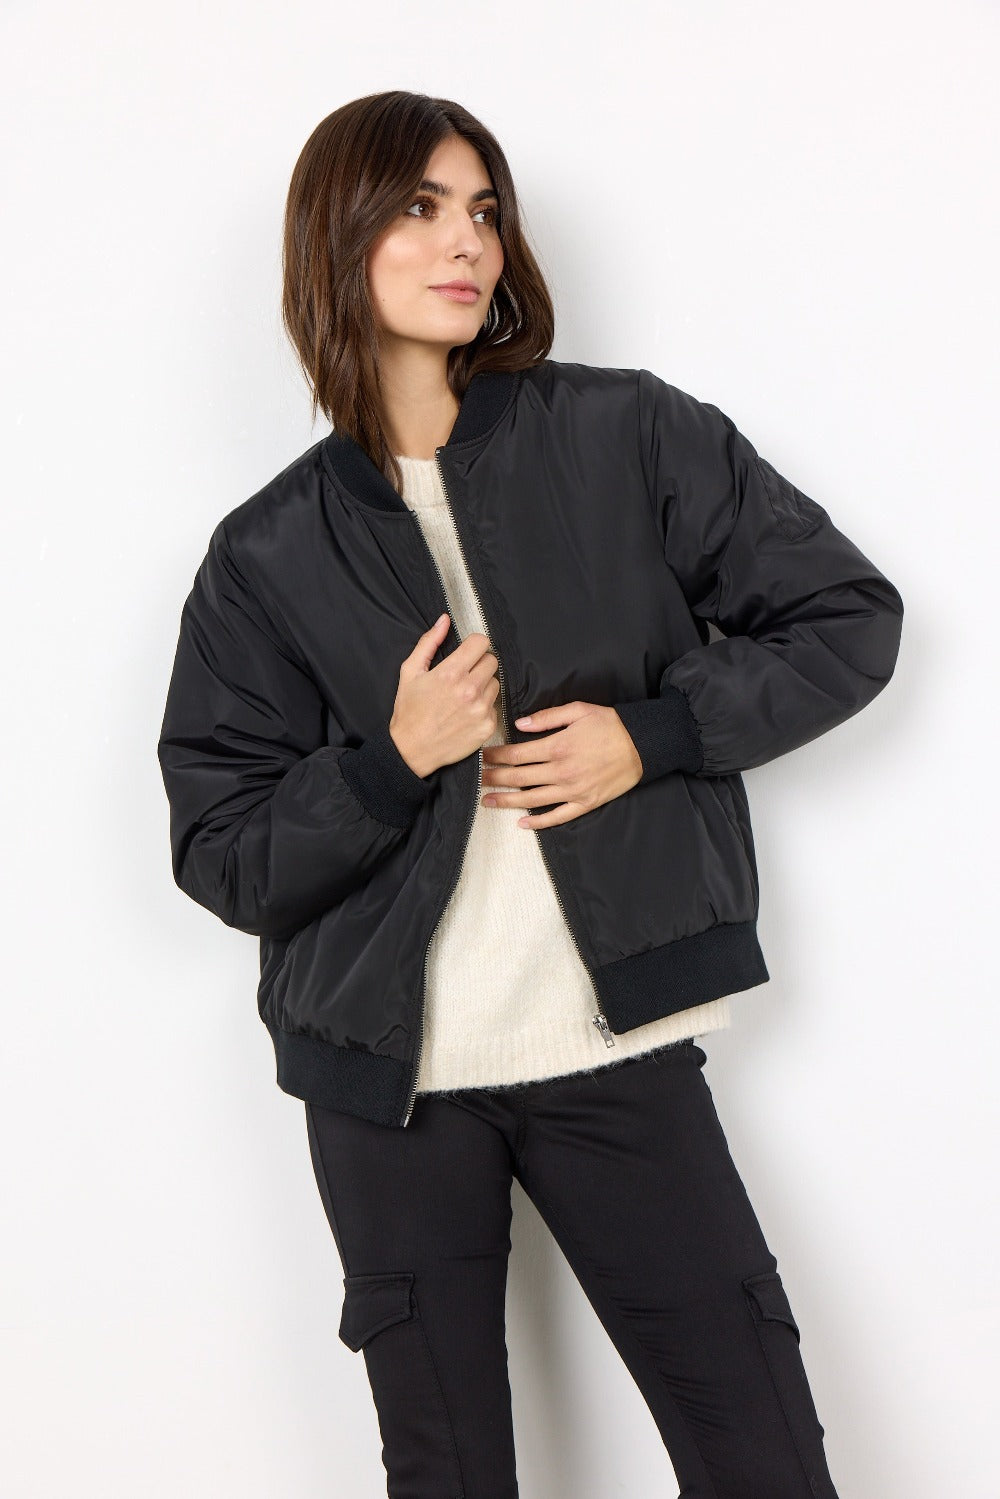 The Soya Concept Tilly Bomber Jacket is a perfect yet simple style for you to have in your wardrobe. With it's high neckline, a zipper, cropped design, a shine finish, and boxy fit you can toss it on as you are heading out the door with confidence.